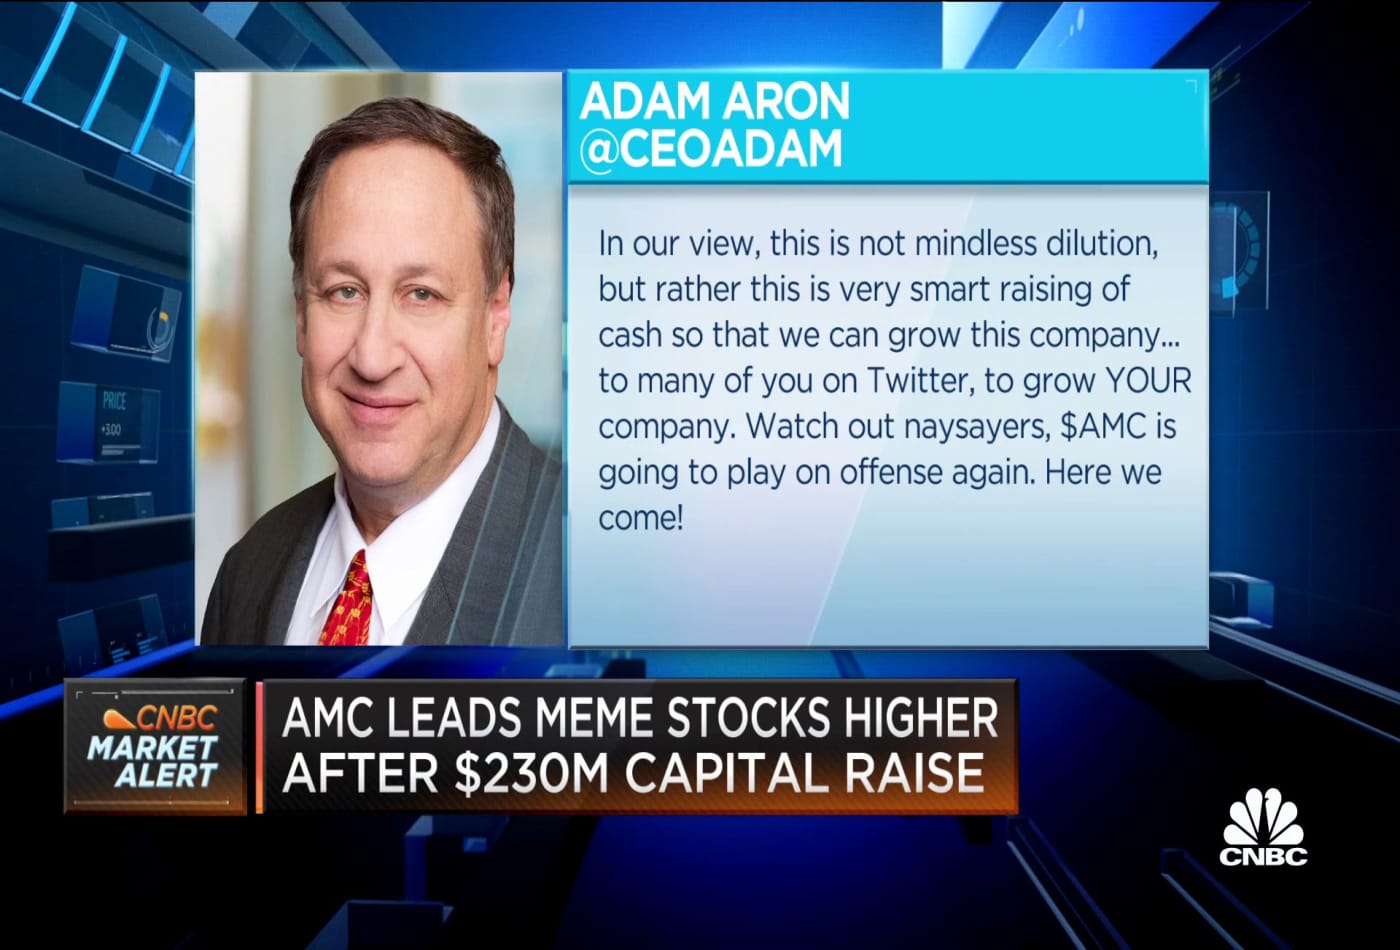 Amc Other Meme Stocks / What to do if you lost money on ...